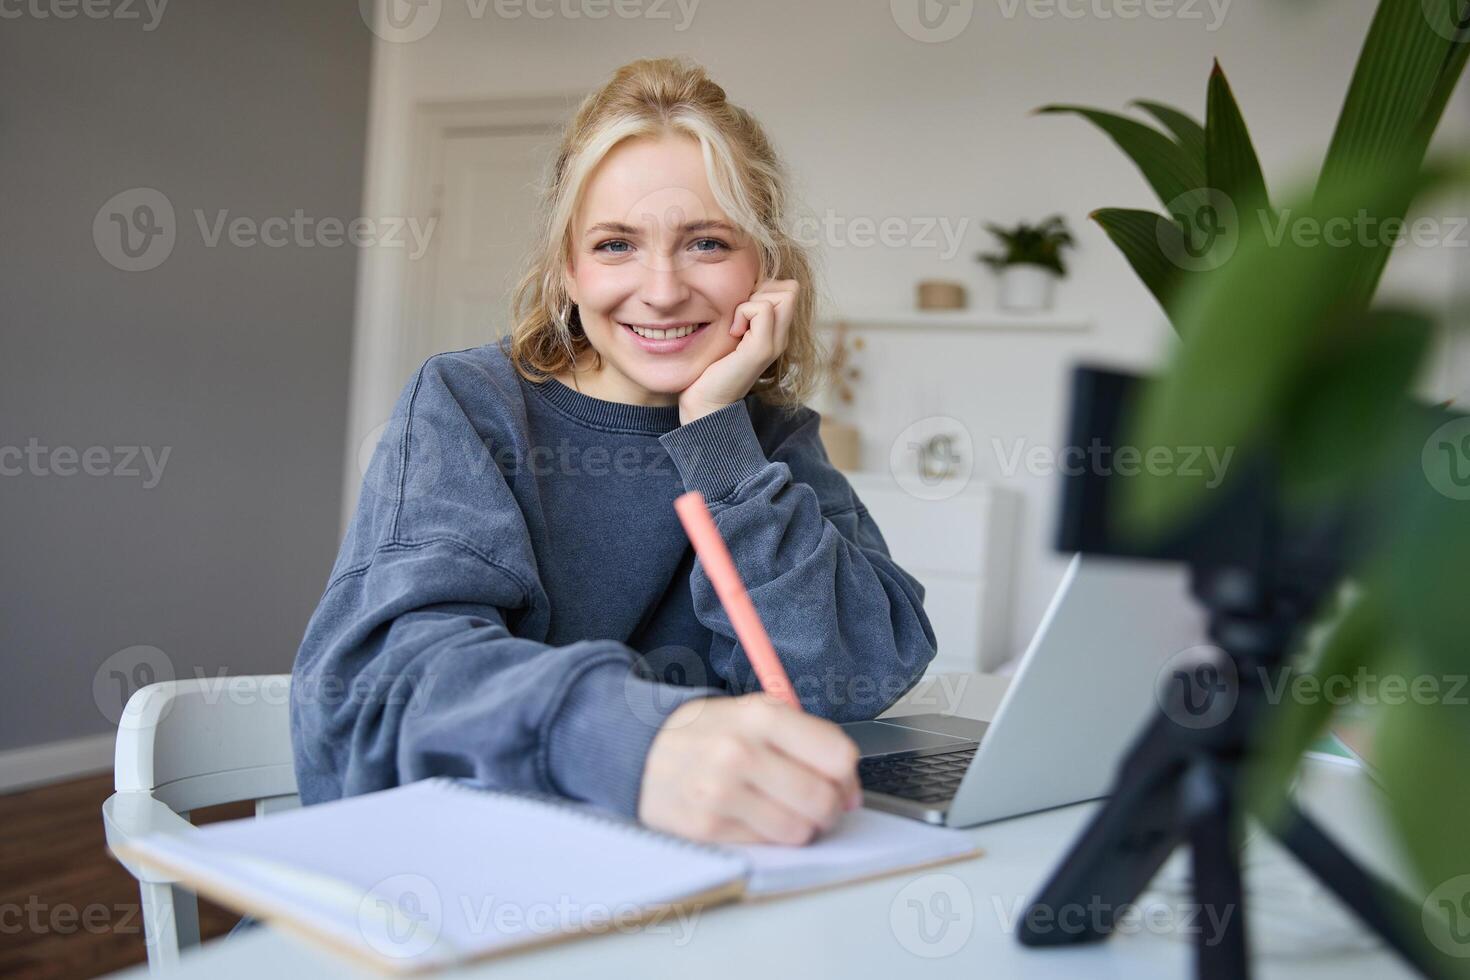 Cute smiling girl sits in a room, writes down notes, doing homework, records of herself on digital camera, creates content for vlog, lifestyle blogger doing daily routine episode photo